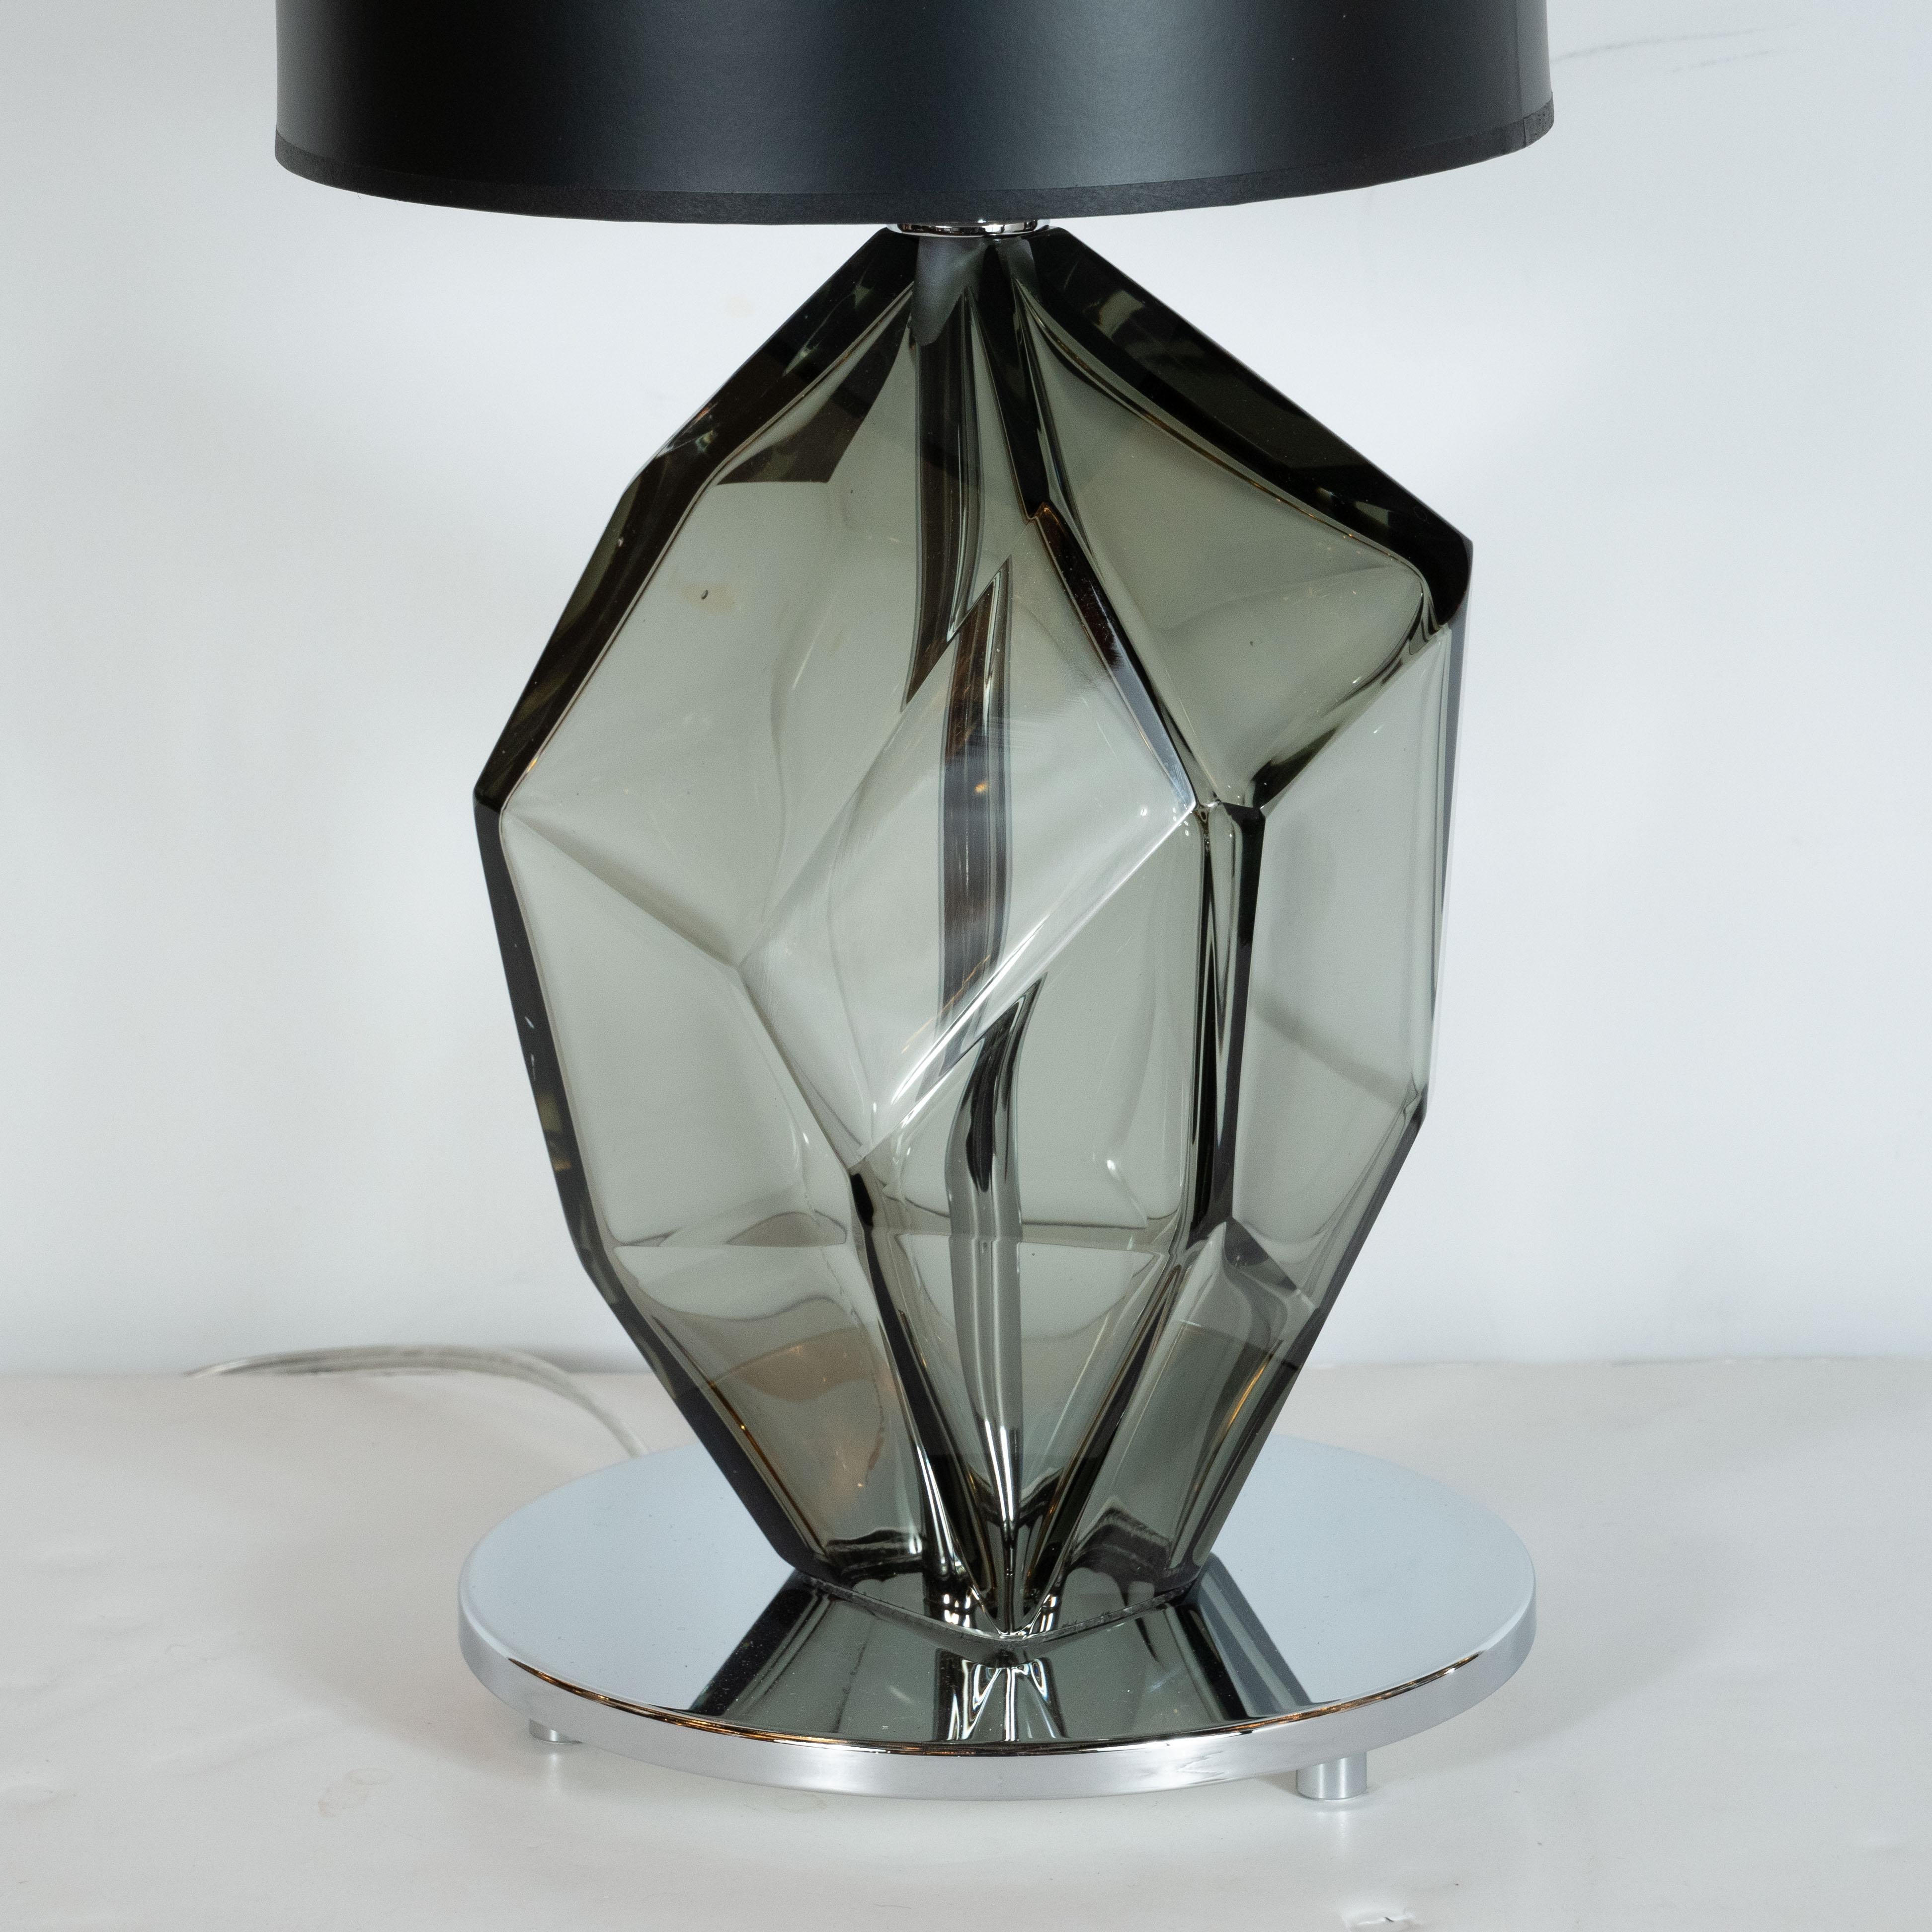 This stunning pair of modernist table lamps were hand blown in Murano, Italy the island off the coast of Venice centuries renowned for superlative glass production. Each lamp has a smoked pewter colored blown glass body that is shaped like an